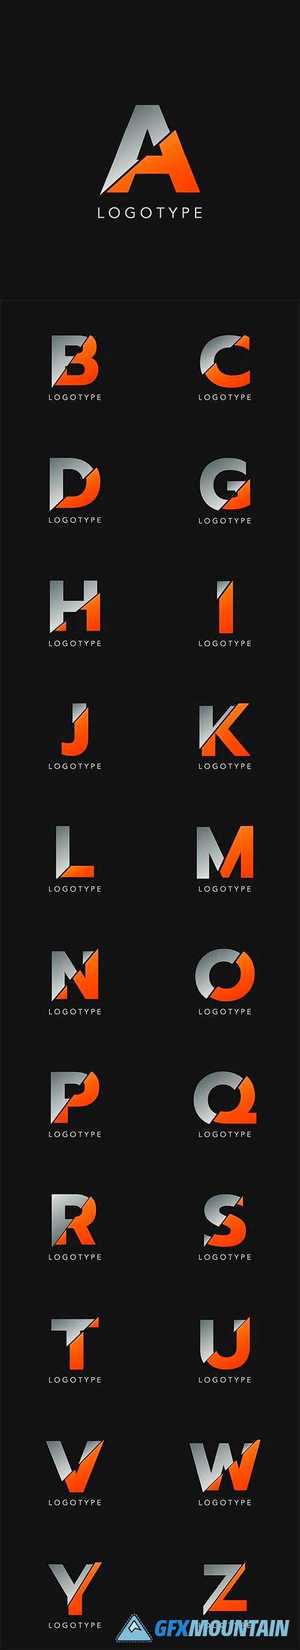 Abstract initial letter logo icon vector design concept